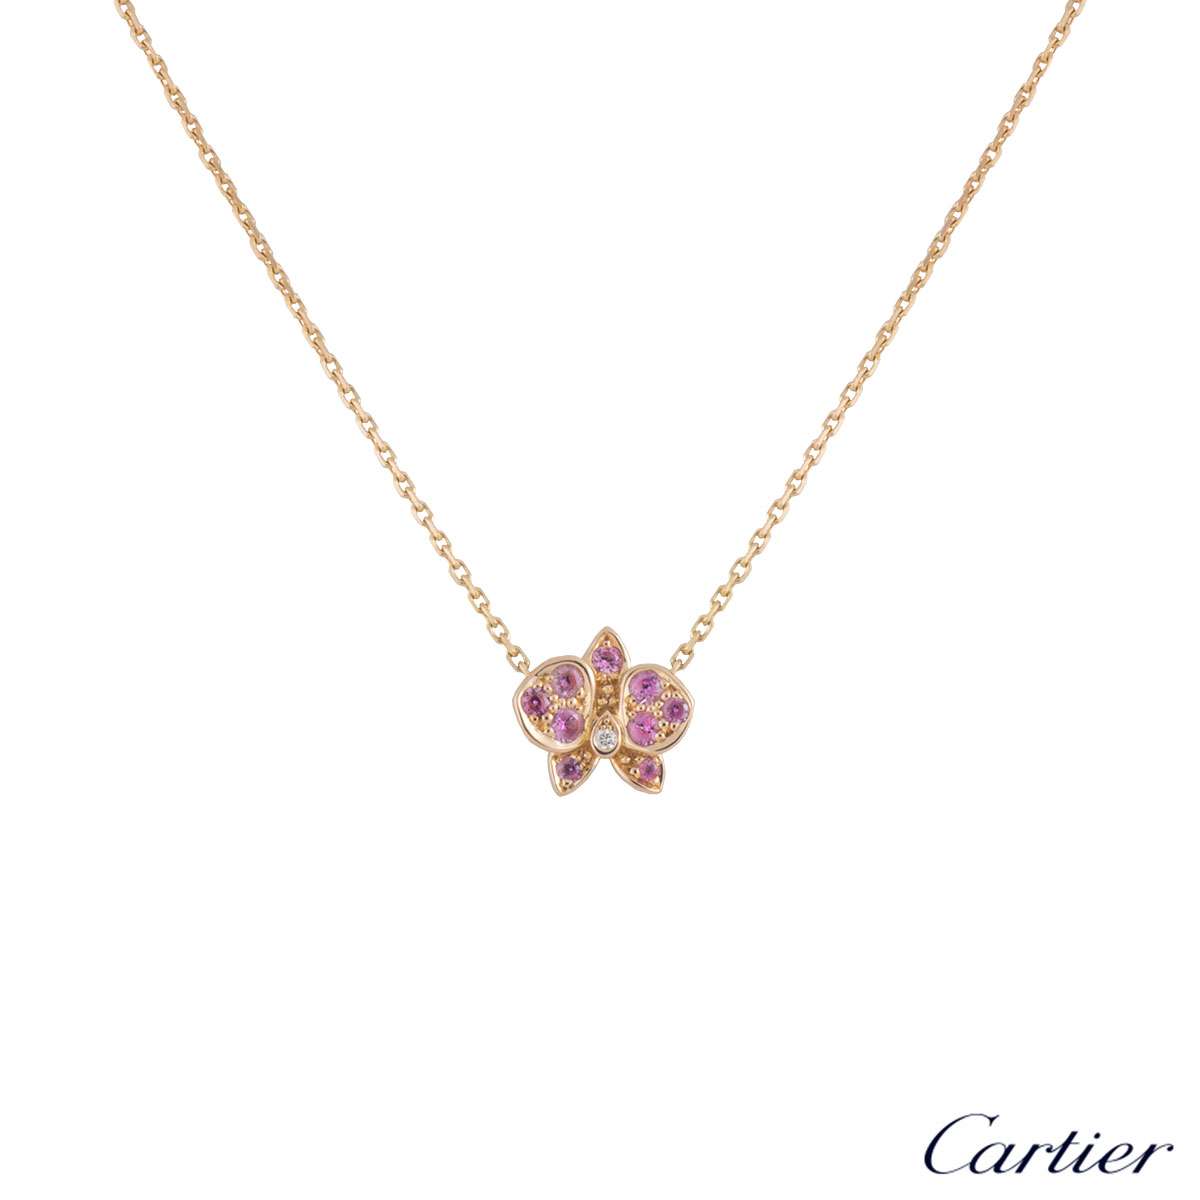 18K GOLD LOVE IN VERONA CIRCLE OF LIFE DIAMOND FLOWER NECKLACE - Roberto  Coin - North America